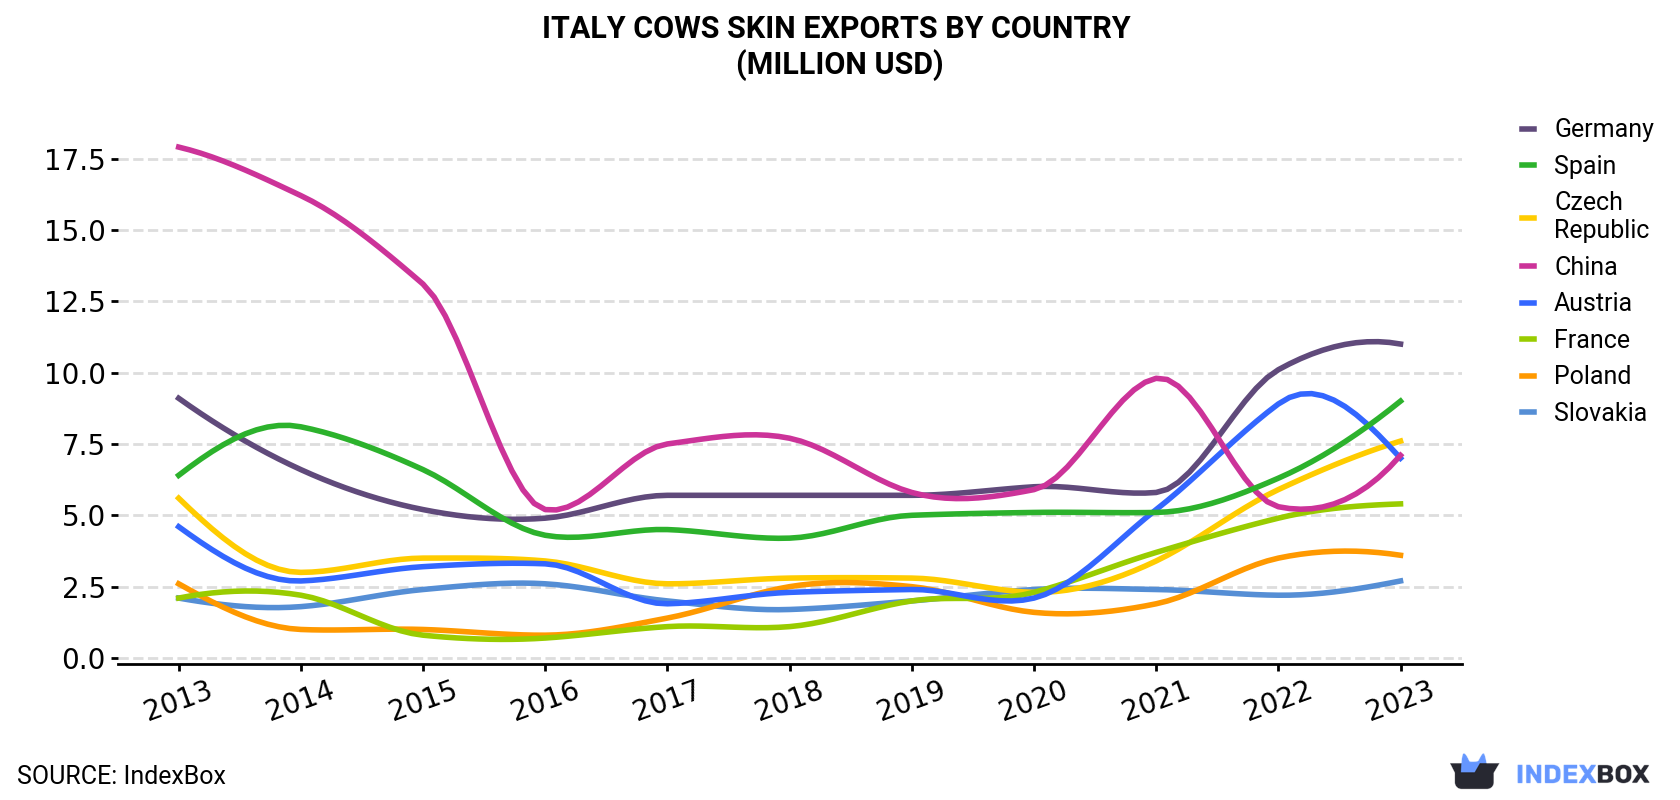 Italy Cows Skin Exports By Country (Million USD)